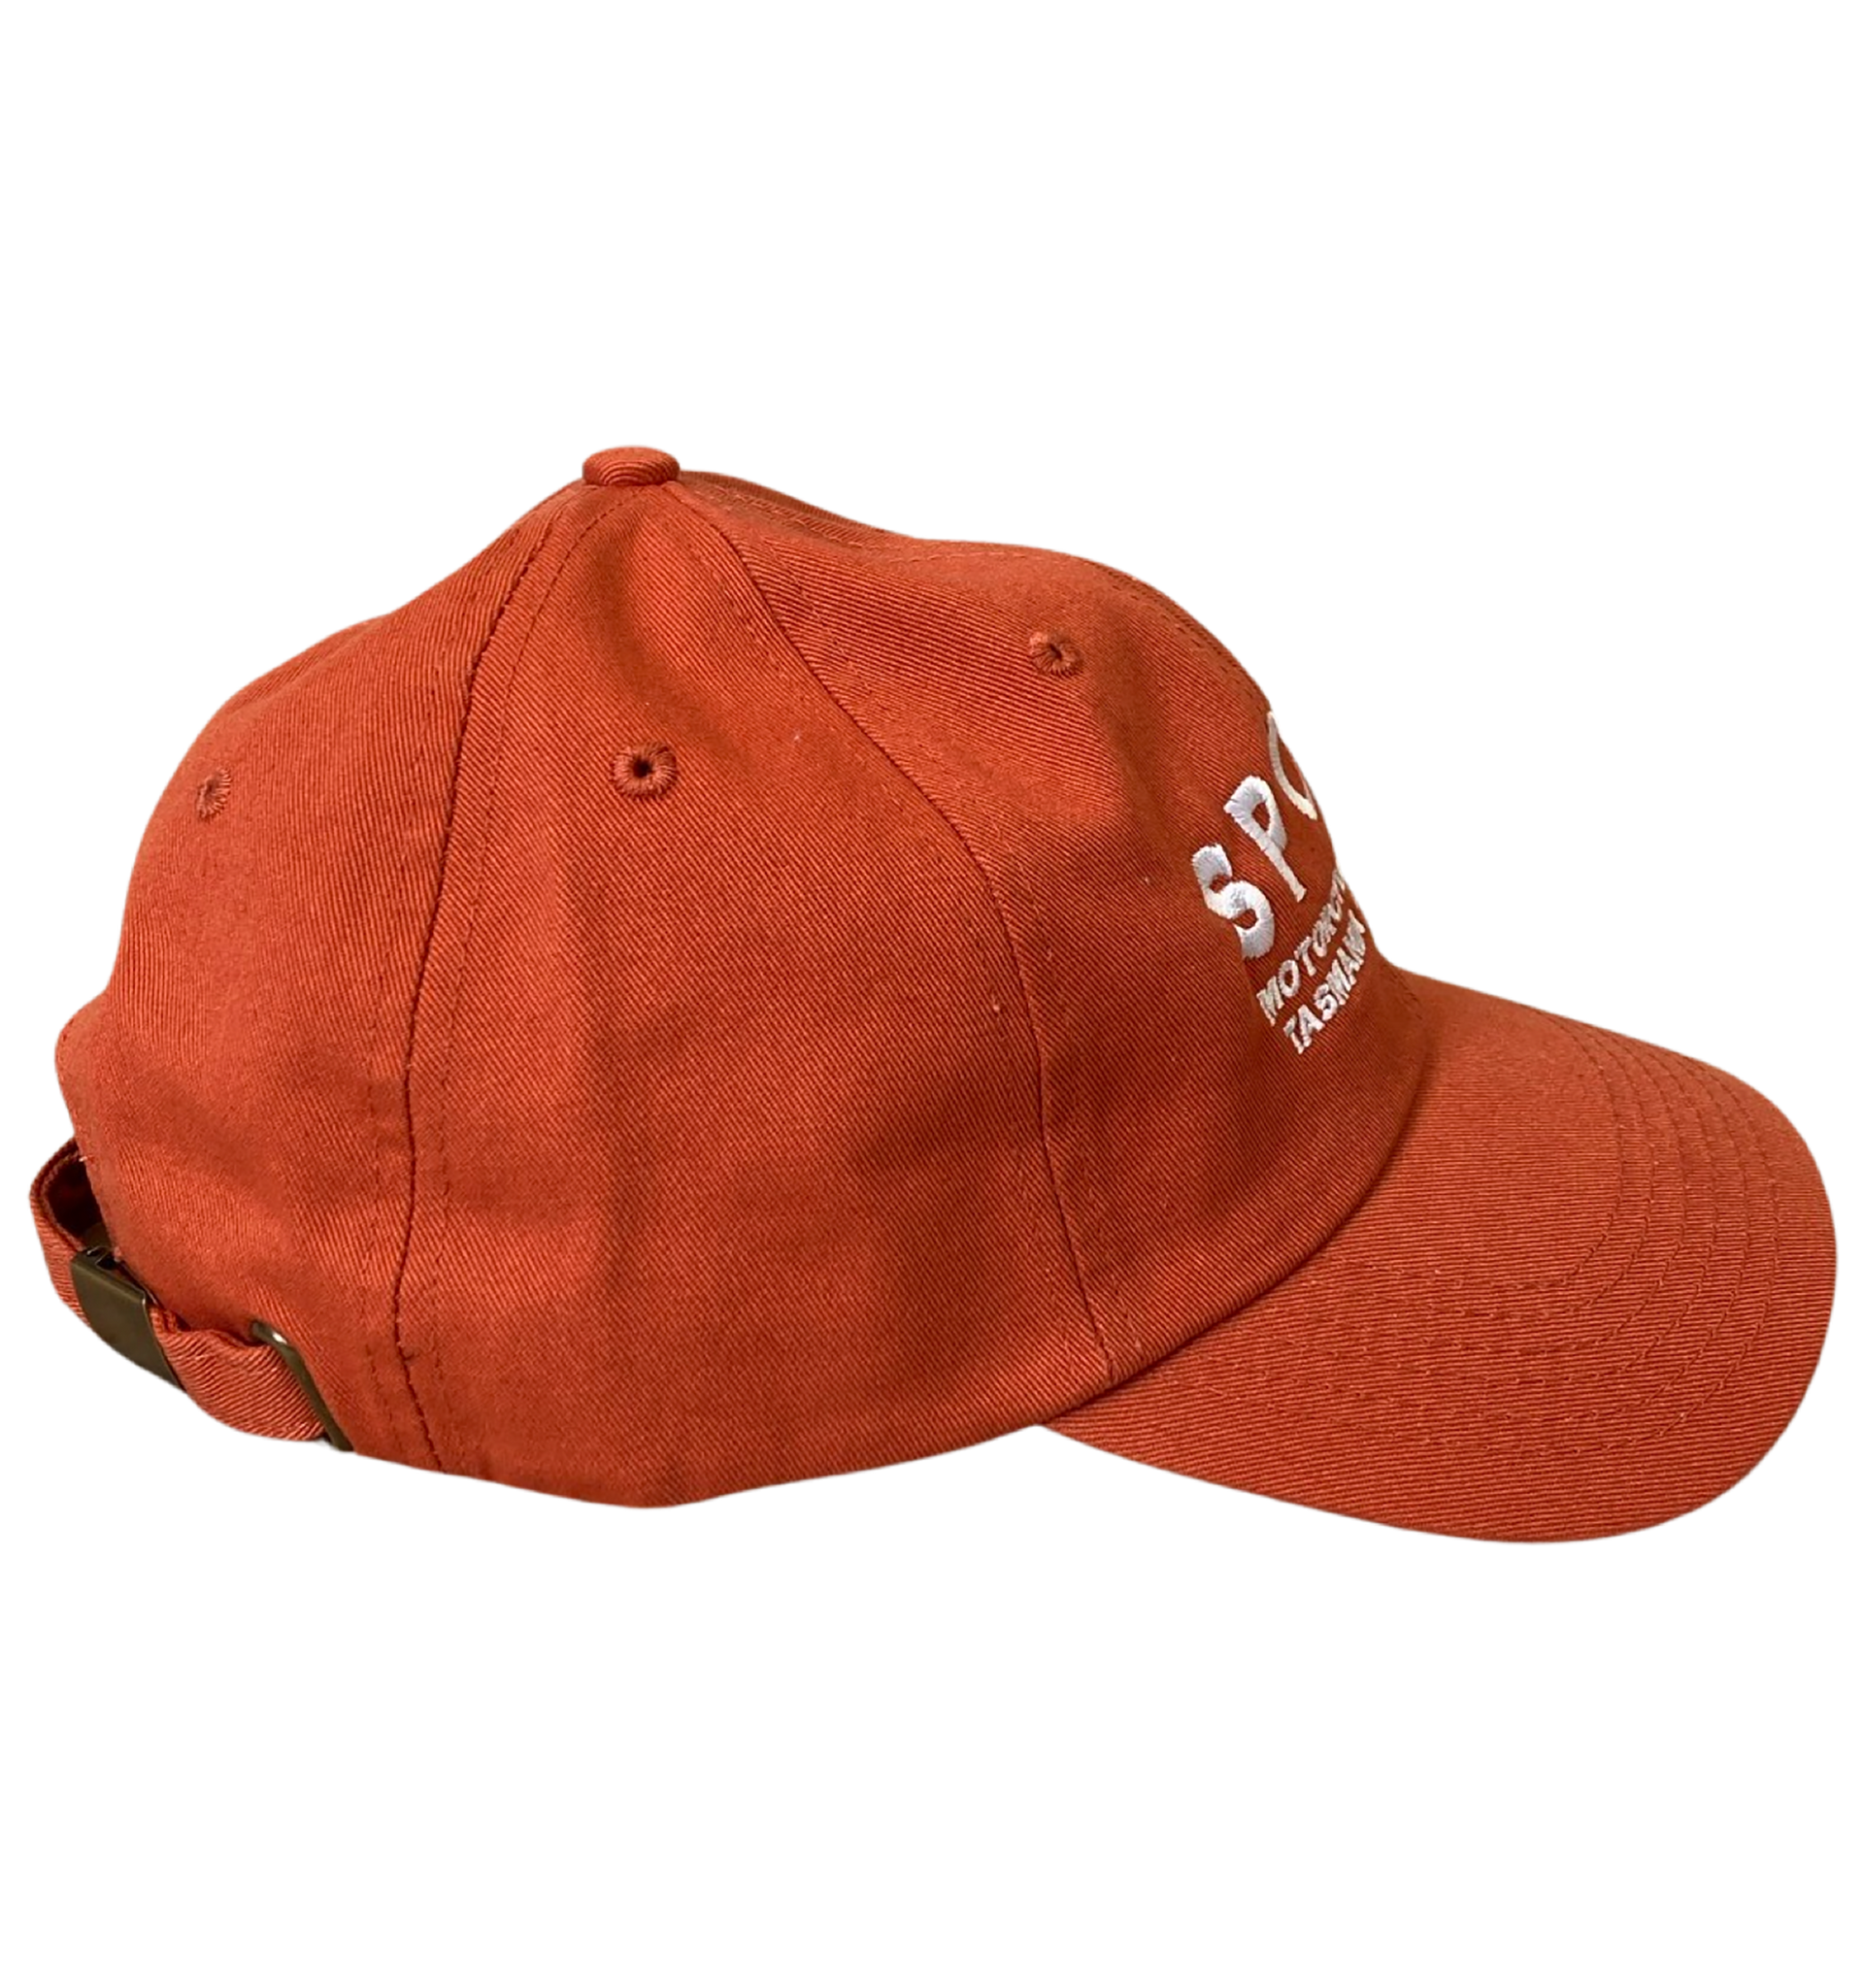 Spoke Rust Embroidered Washed Chino Twill Cap - Location